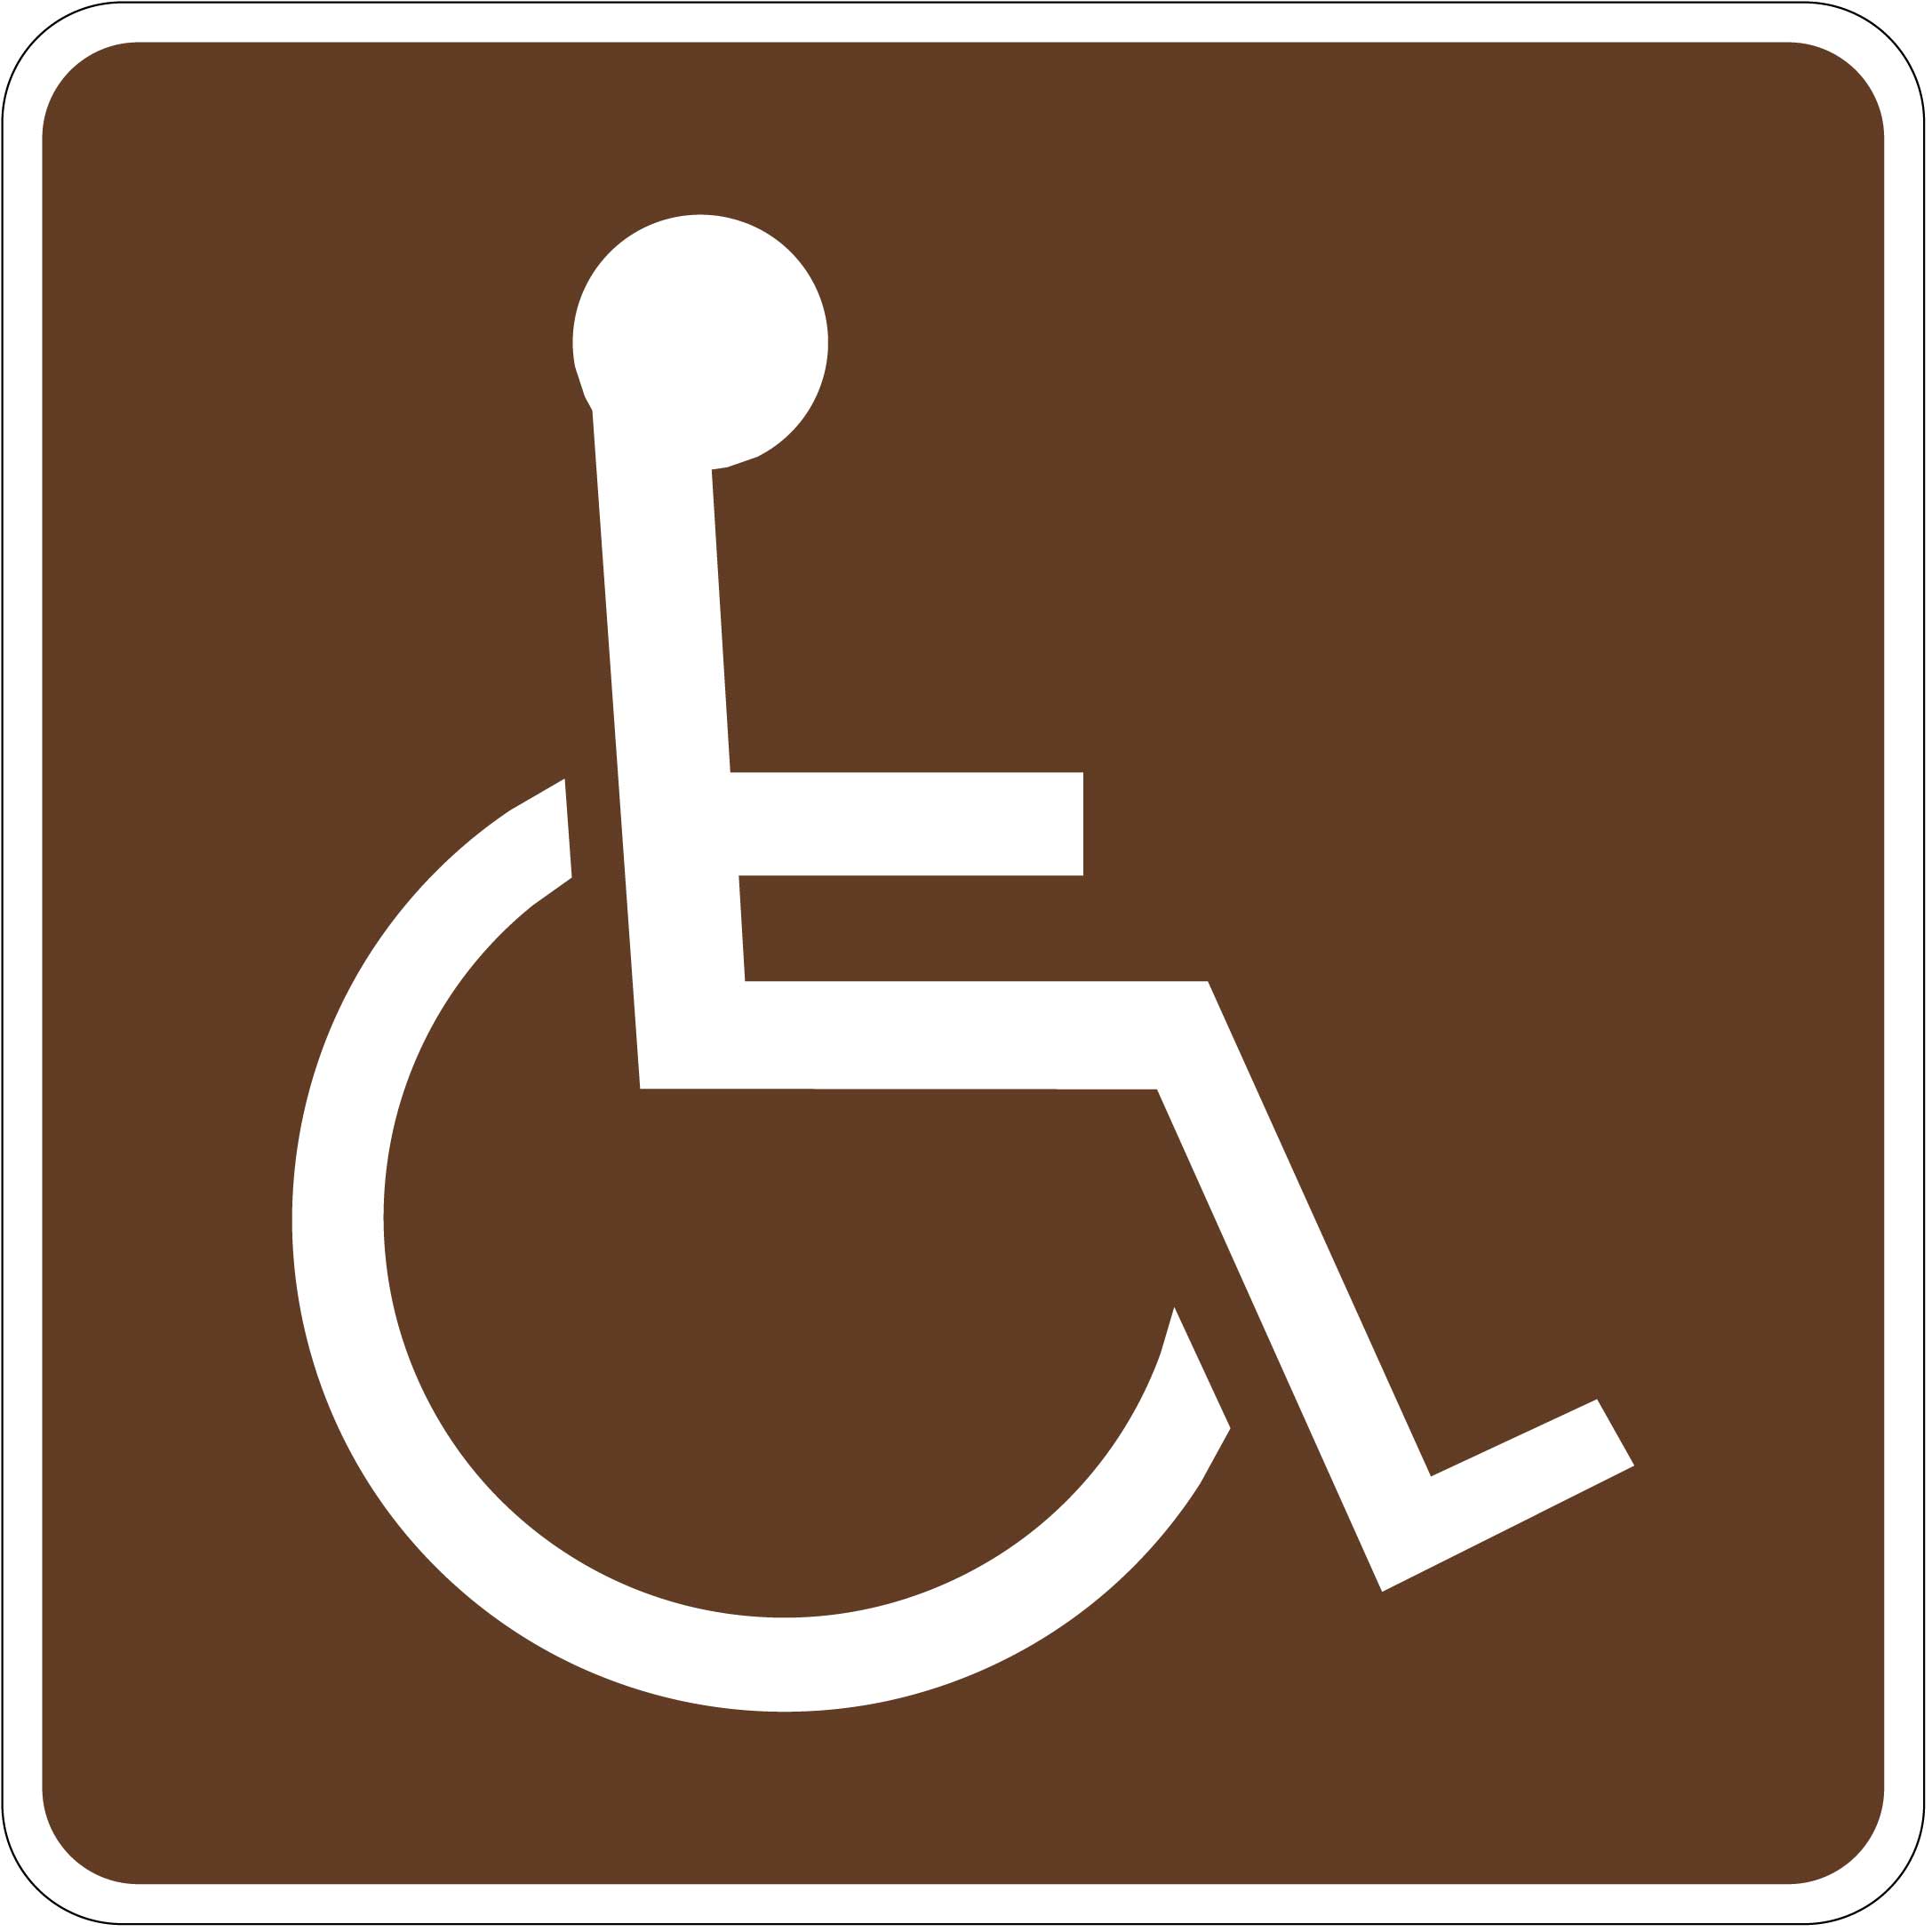 Larger Photo - Outdoor Recreation Sign - Handicapped Symbol ...